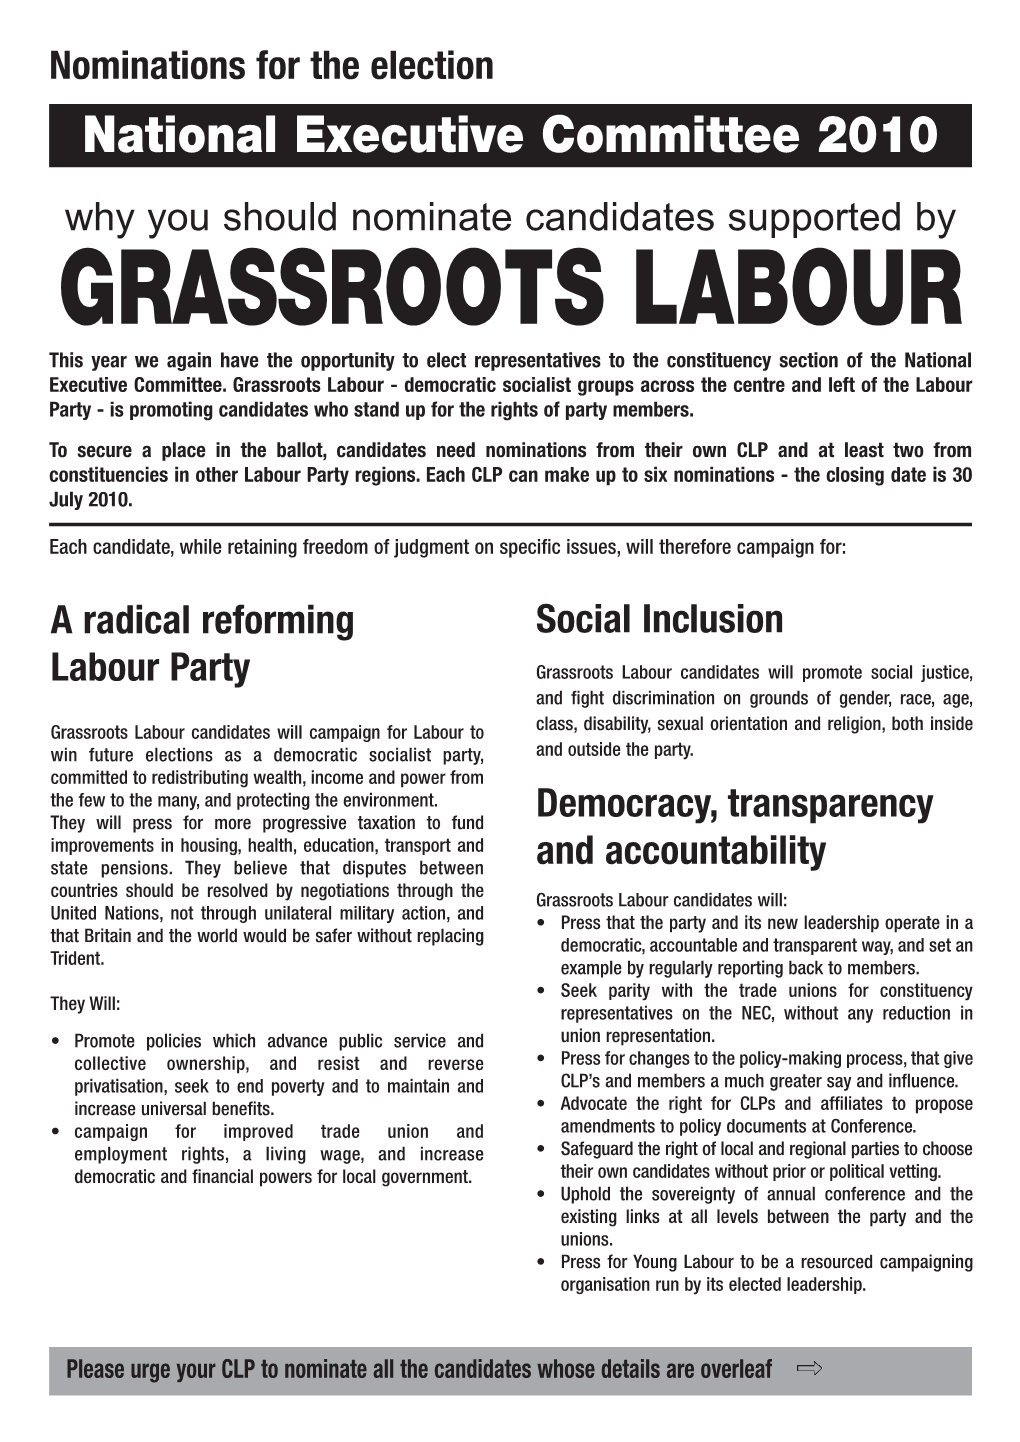 GRASSROOTS LABOUR This Year We Again Have the Opportunity to Elect Representatives to the Constituency Section of the National Executive Committee